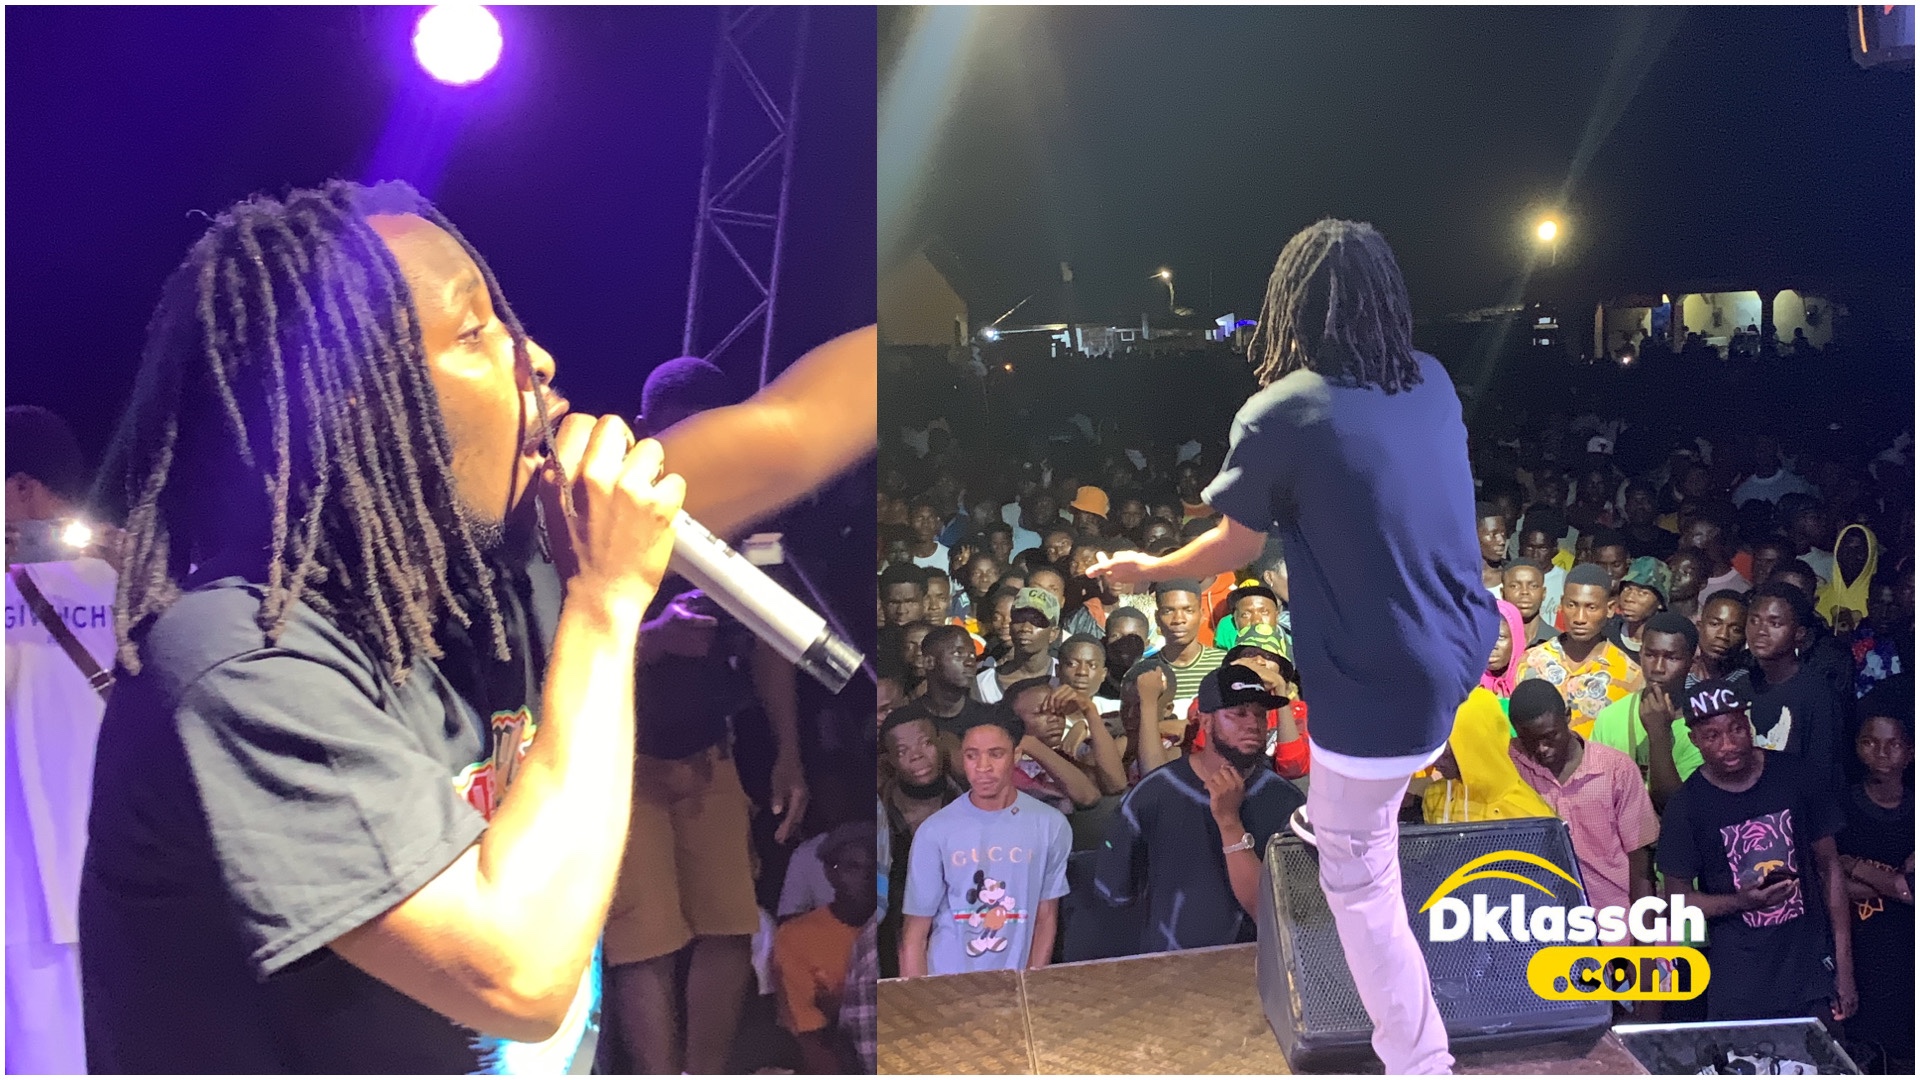 Raingad Performs "Heavy" for the first Time at Kpese Concert - WATCH